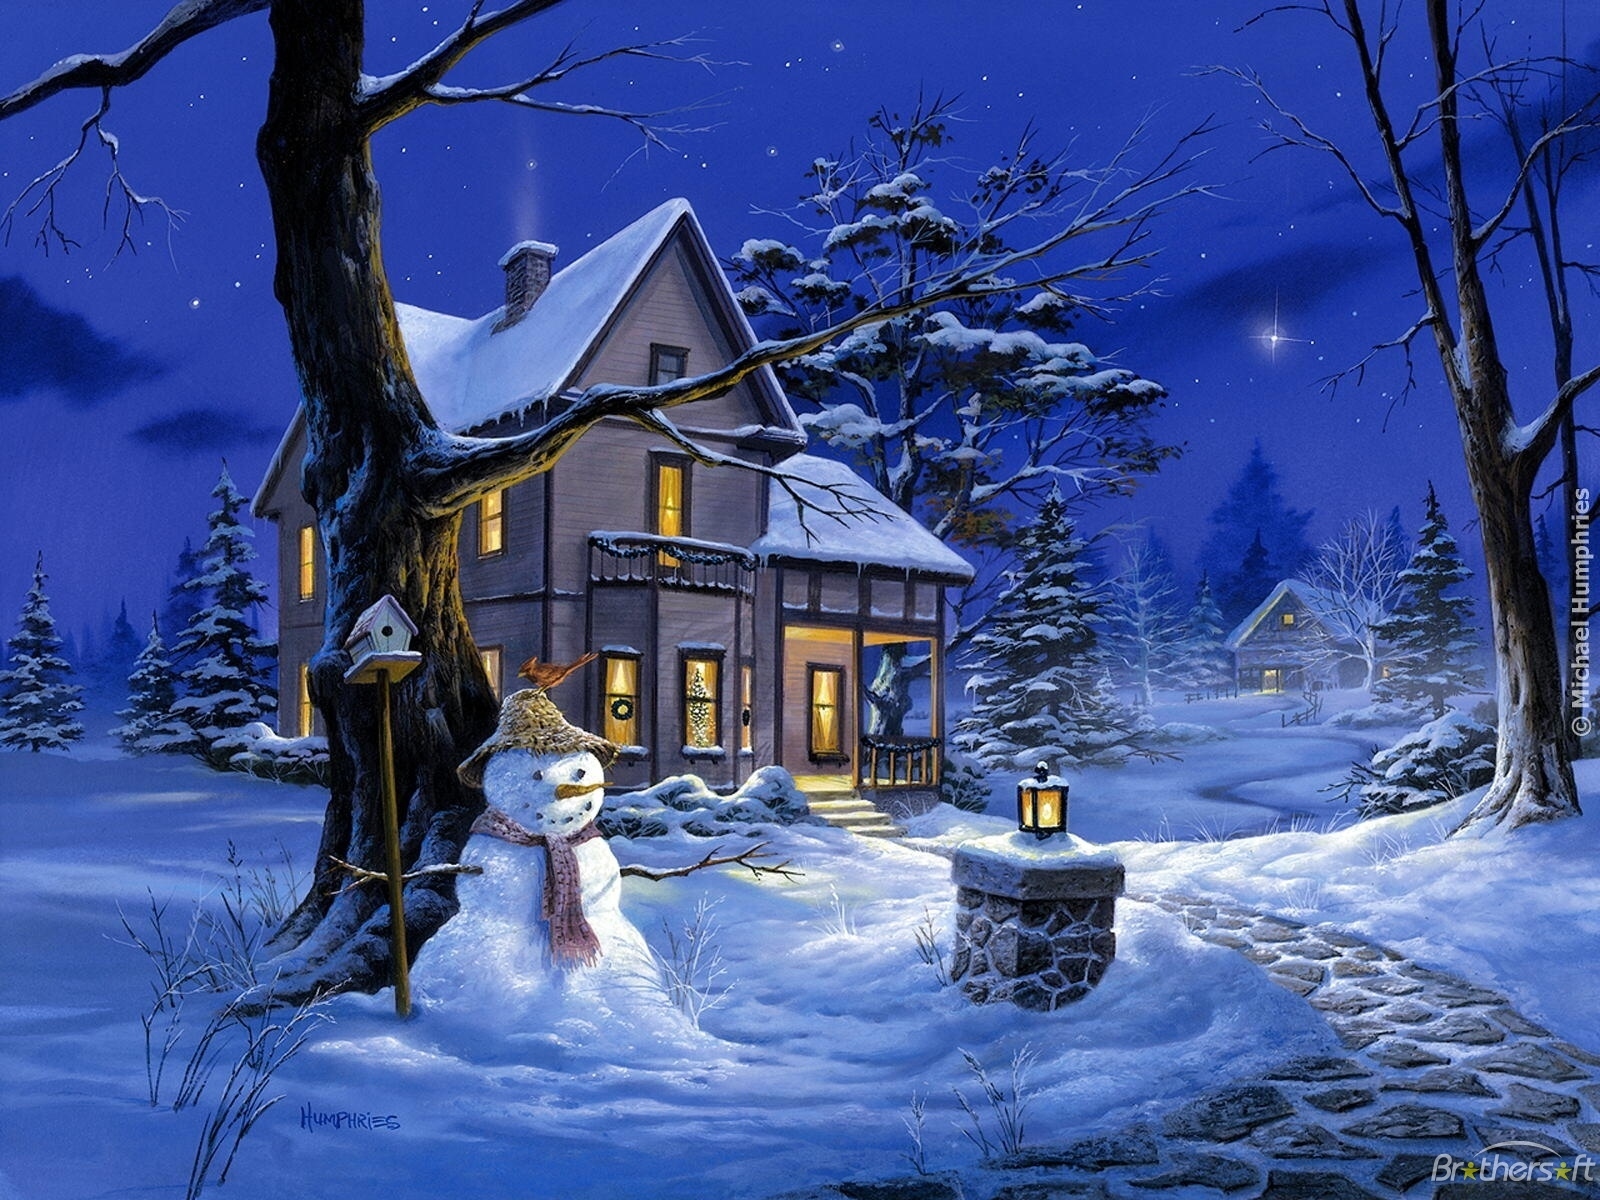 pictures, snow, christmas xmas, winter, blue, landscape, new year, houses